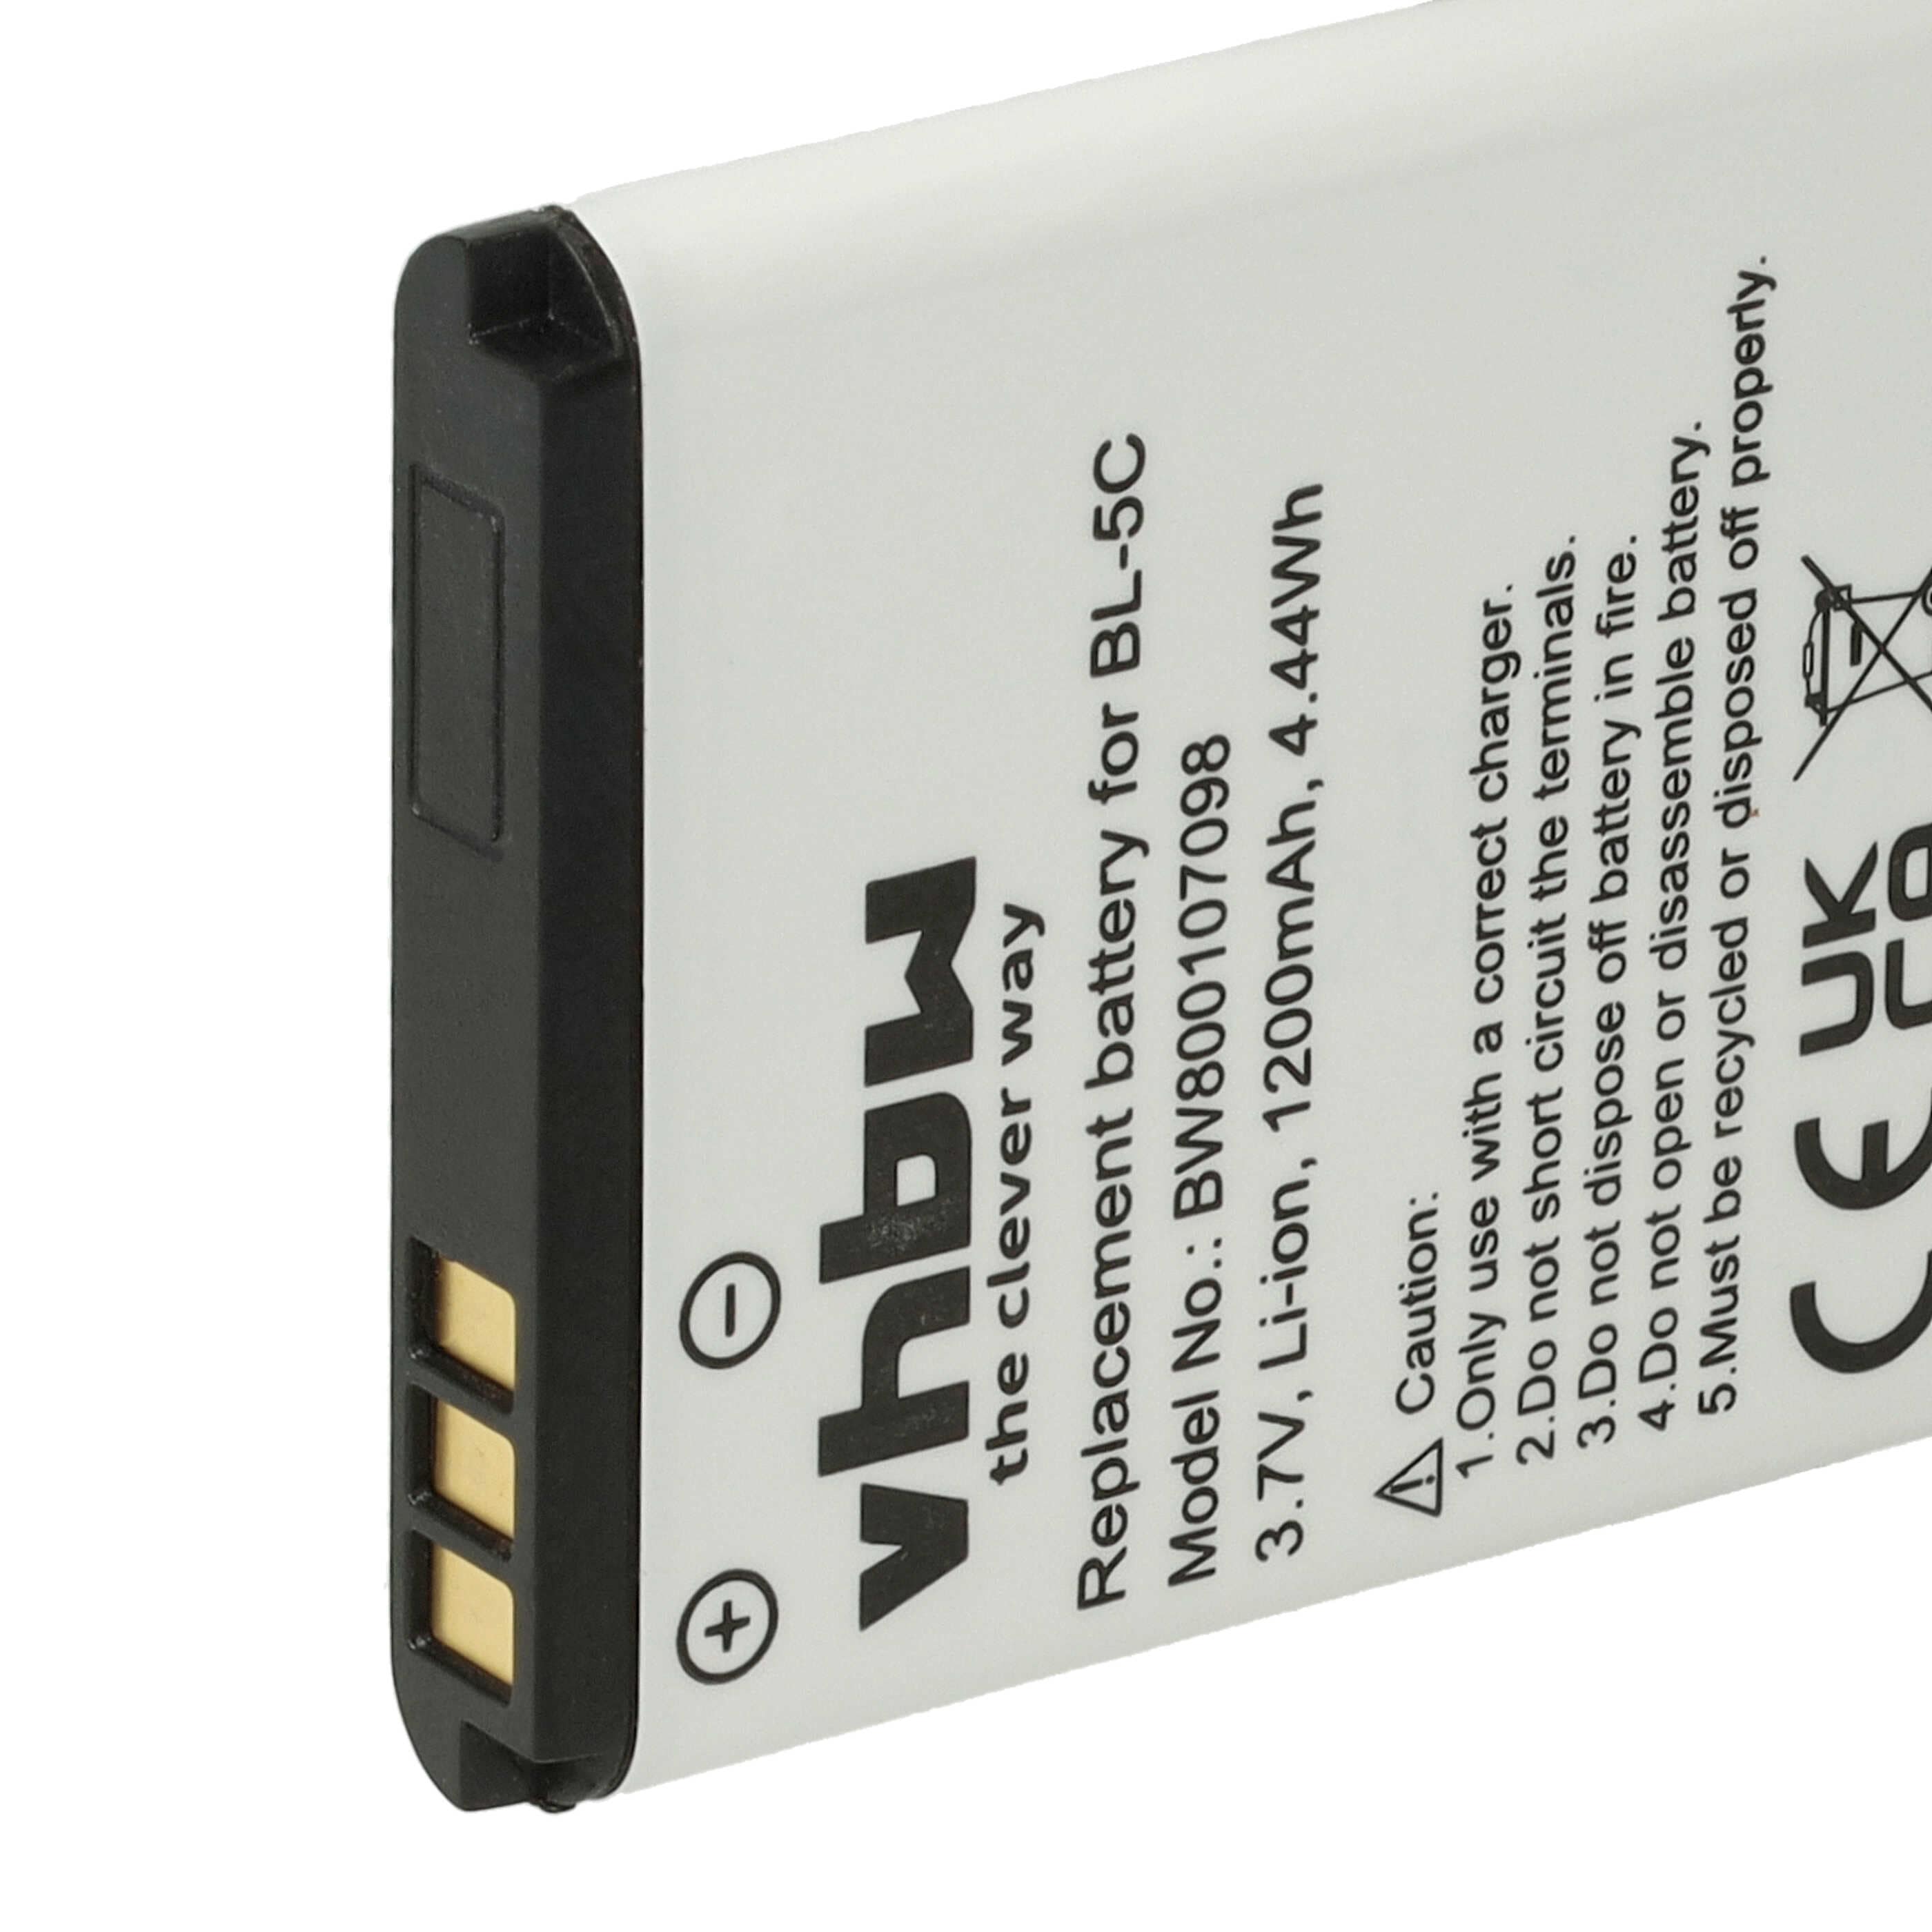 Mobile Phone Battery Replacement for A051 - 1200mAh 3.7V Li-Ion